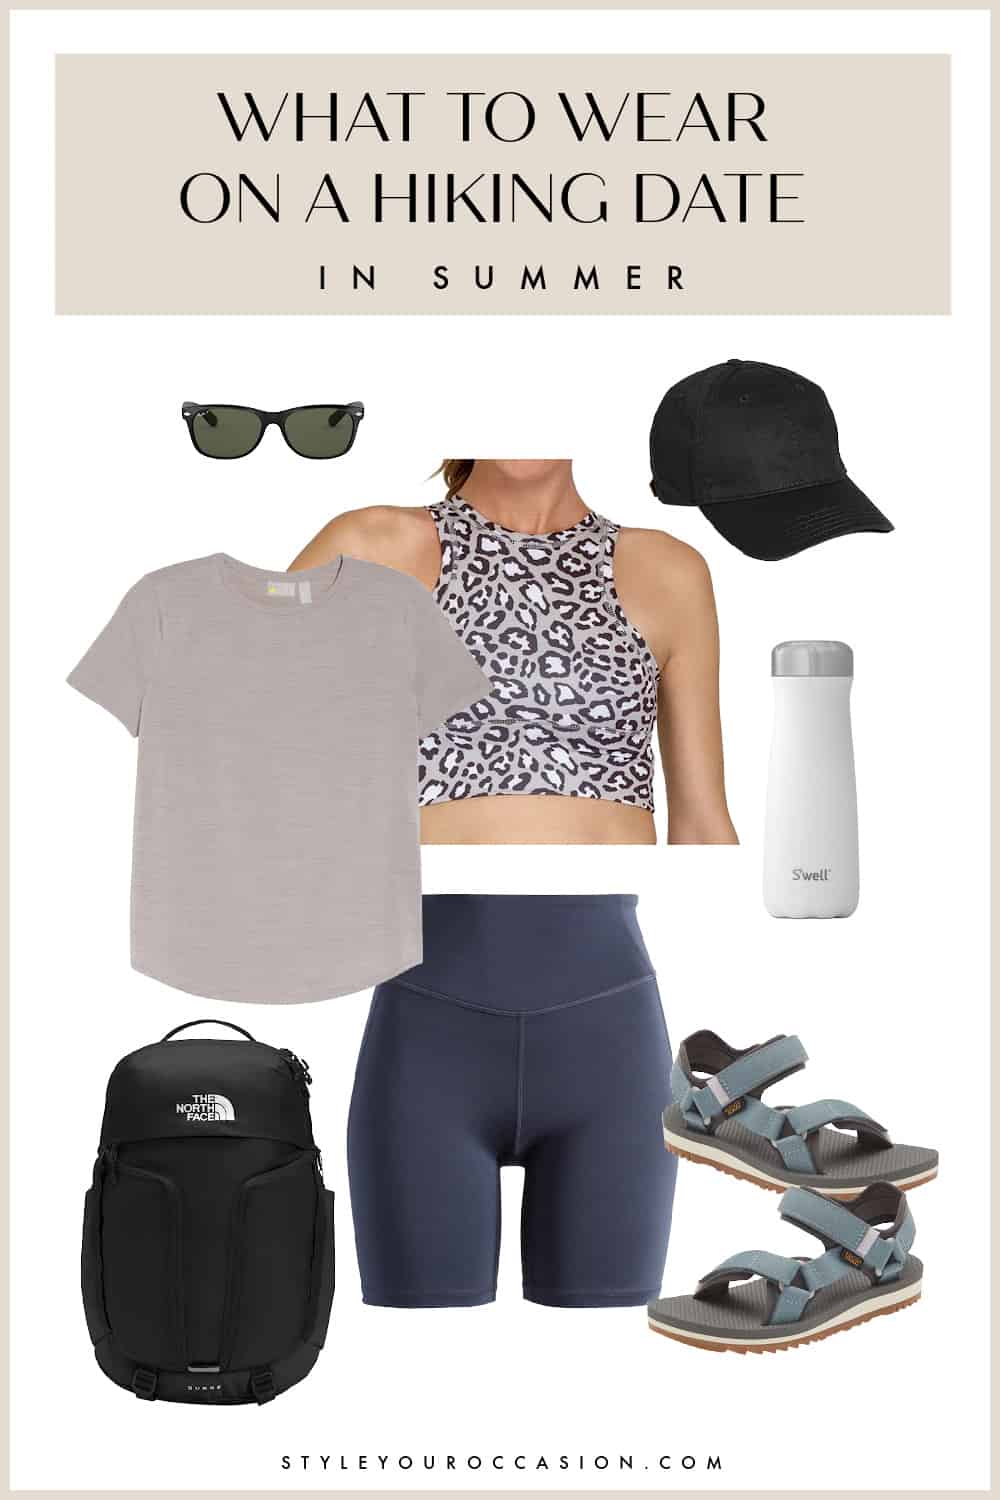 outfit collage for what to wear on a hiking date in the the summer with a light t-shirt, sports bra, spandex shorts, hiking sandals, hat, and backpack 